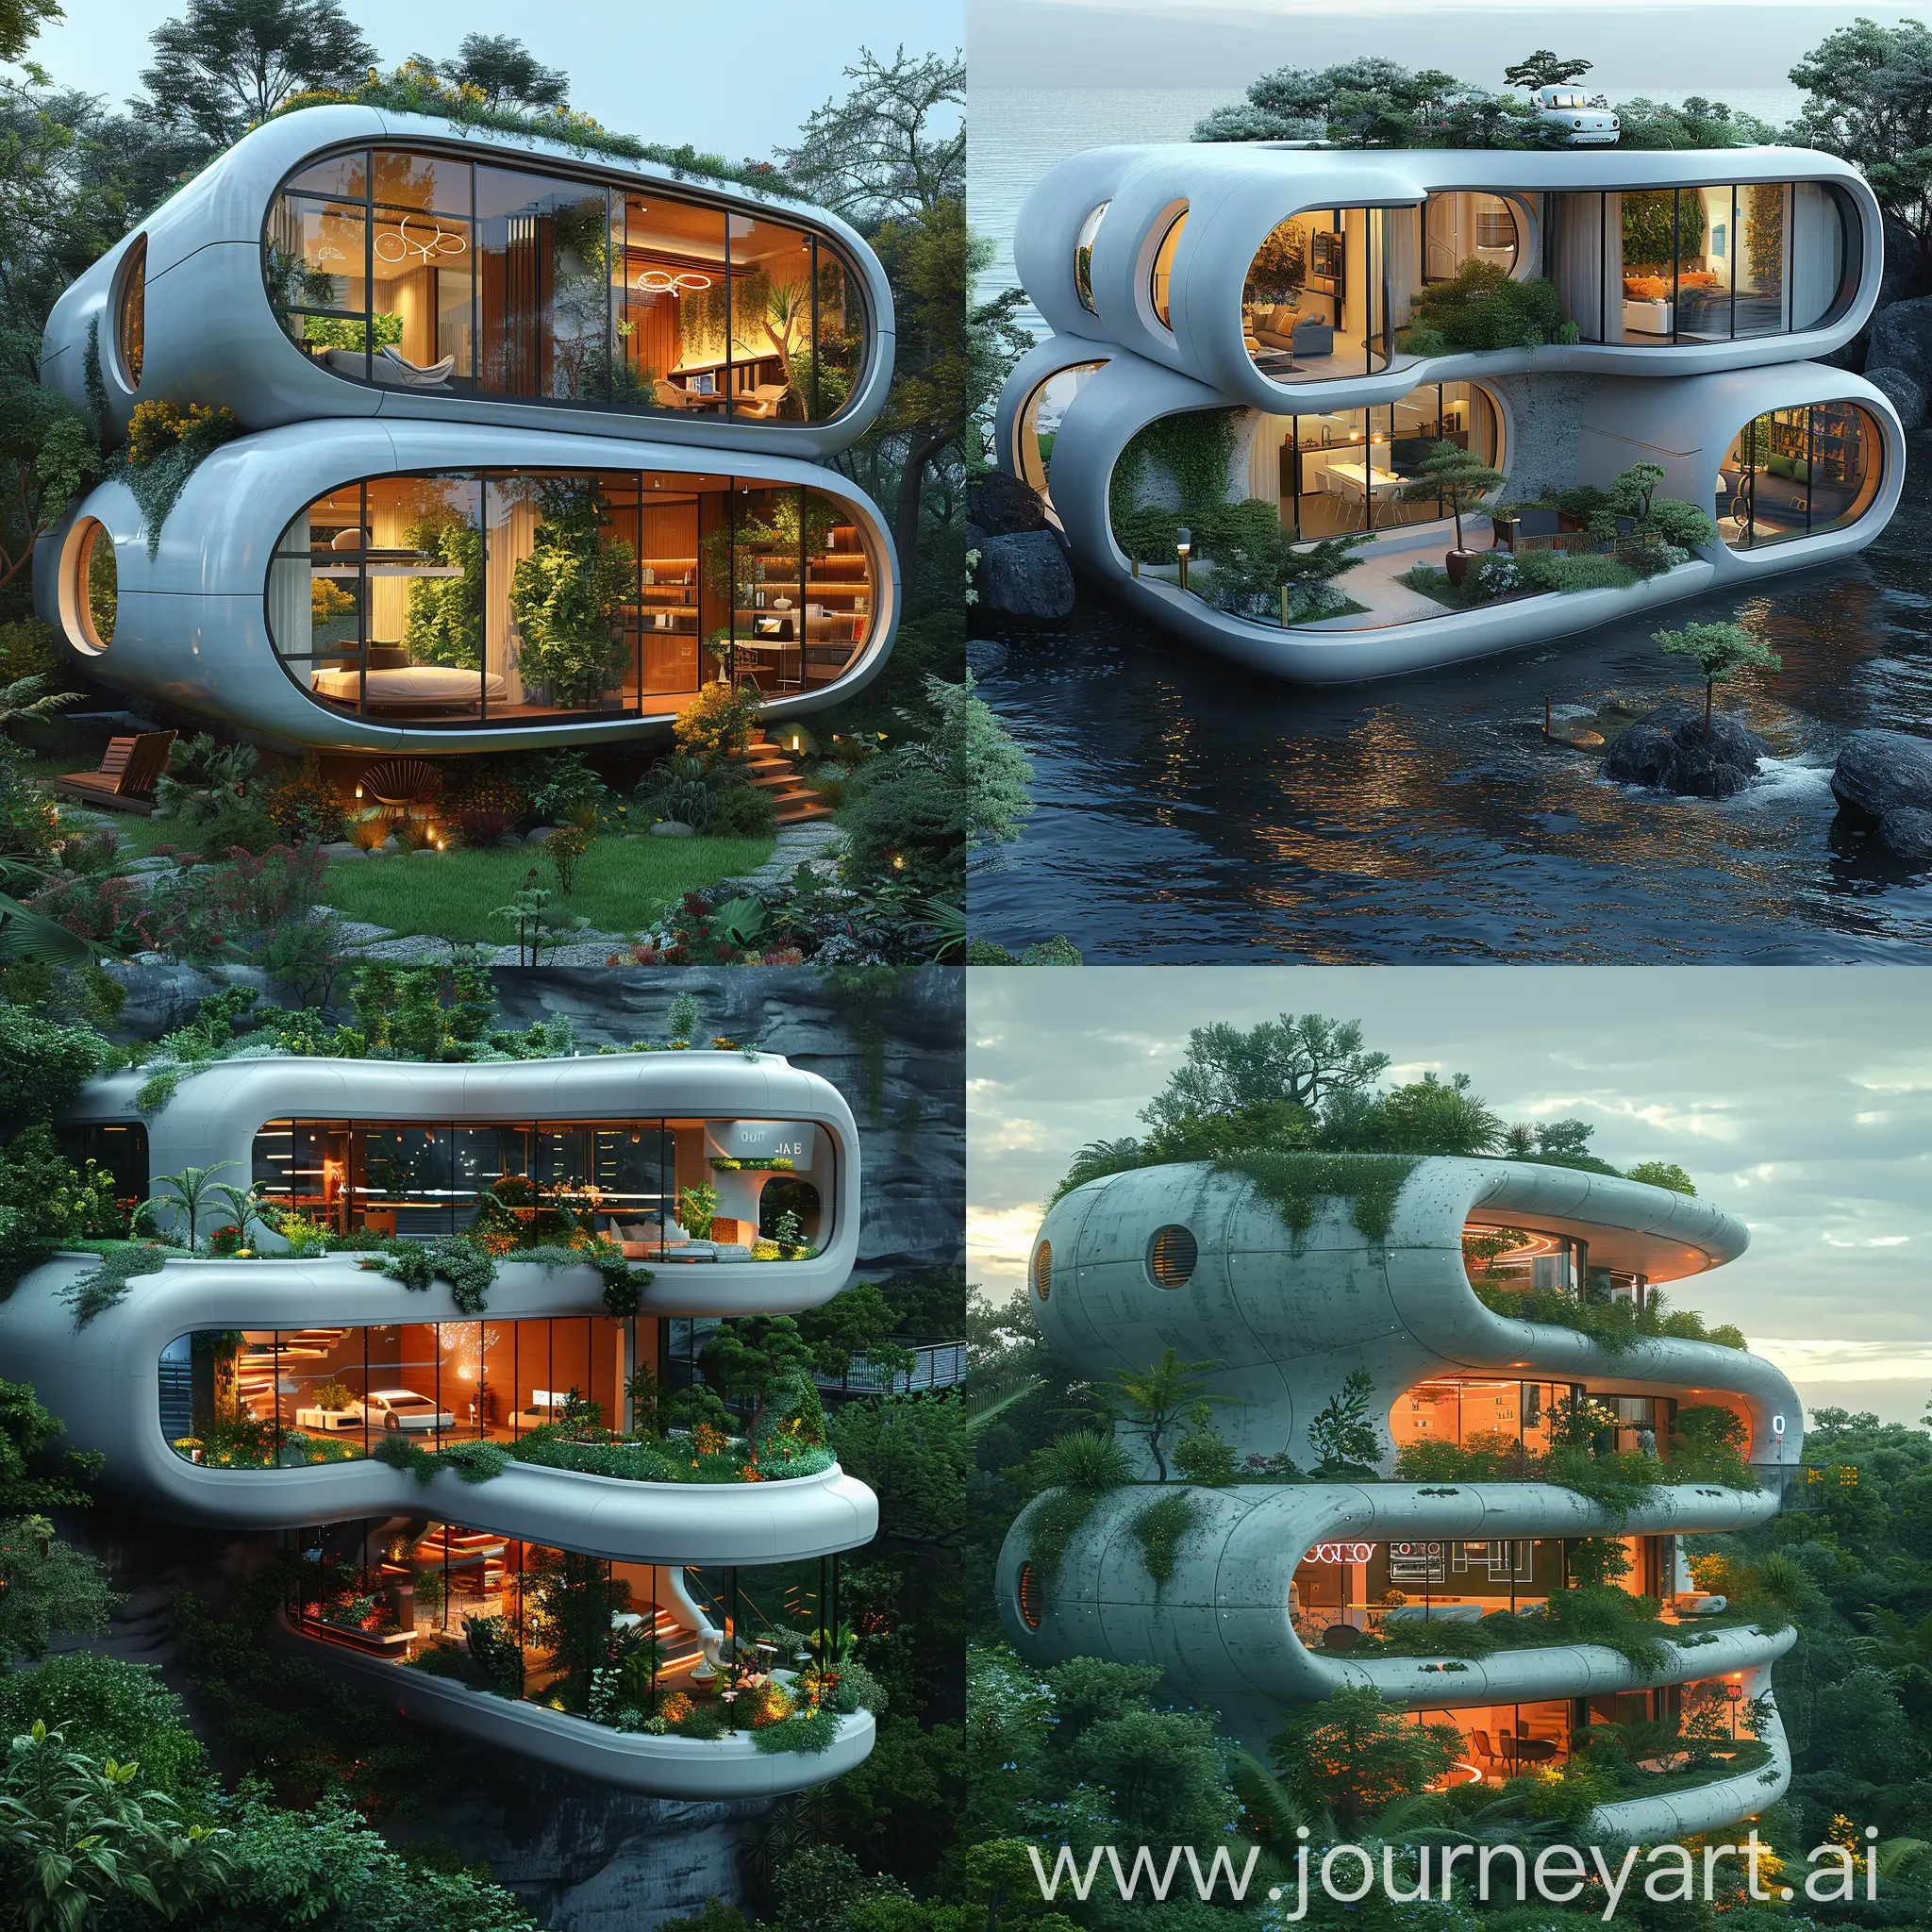 Futuristic house, Smart Home Automation, Biometric Security Systems, Augmented Reality (AR) Windows, Robot Assistants, Self-Healing Materials, Vertical Gardens, 3D Printed Furniture, Solar Roof Tiles, Holographic Displays, Underwater Rooms, Green Roof, Passive Solar Design, Rainwater Harvesting System, Geothermal Heating and Cooling, Energy-Efficient Appliances, Greywater Recycling, Bamboo Flooring, Living Walls, LED Lighting, Recycled Materials, Hurricane-Resistant Windows, Reinforced Concrete Walls, Bulletproof Doors, Steel Roofing, Fiber Cement Siding, Shatterproof Glass, Rubberized Flooring, Impact-Resistant Insulation, Masonry Construction, Anti-Seismic Design, octane render --stylize 1000